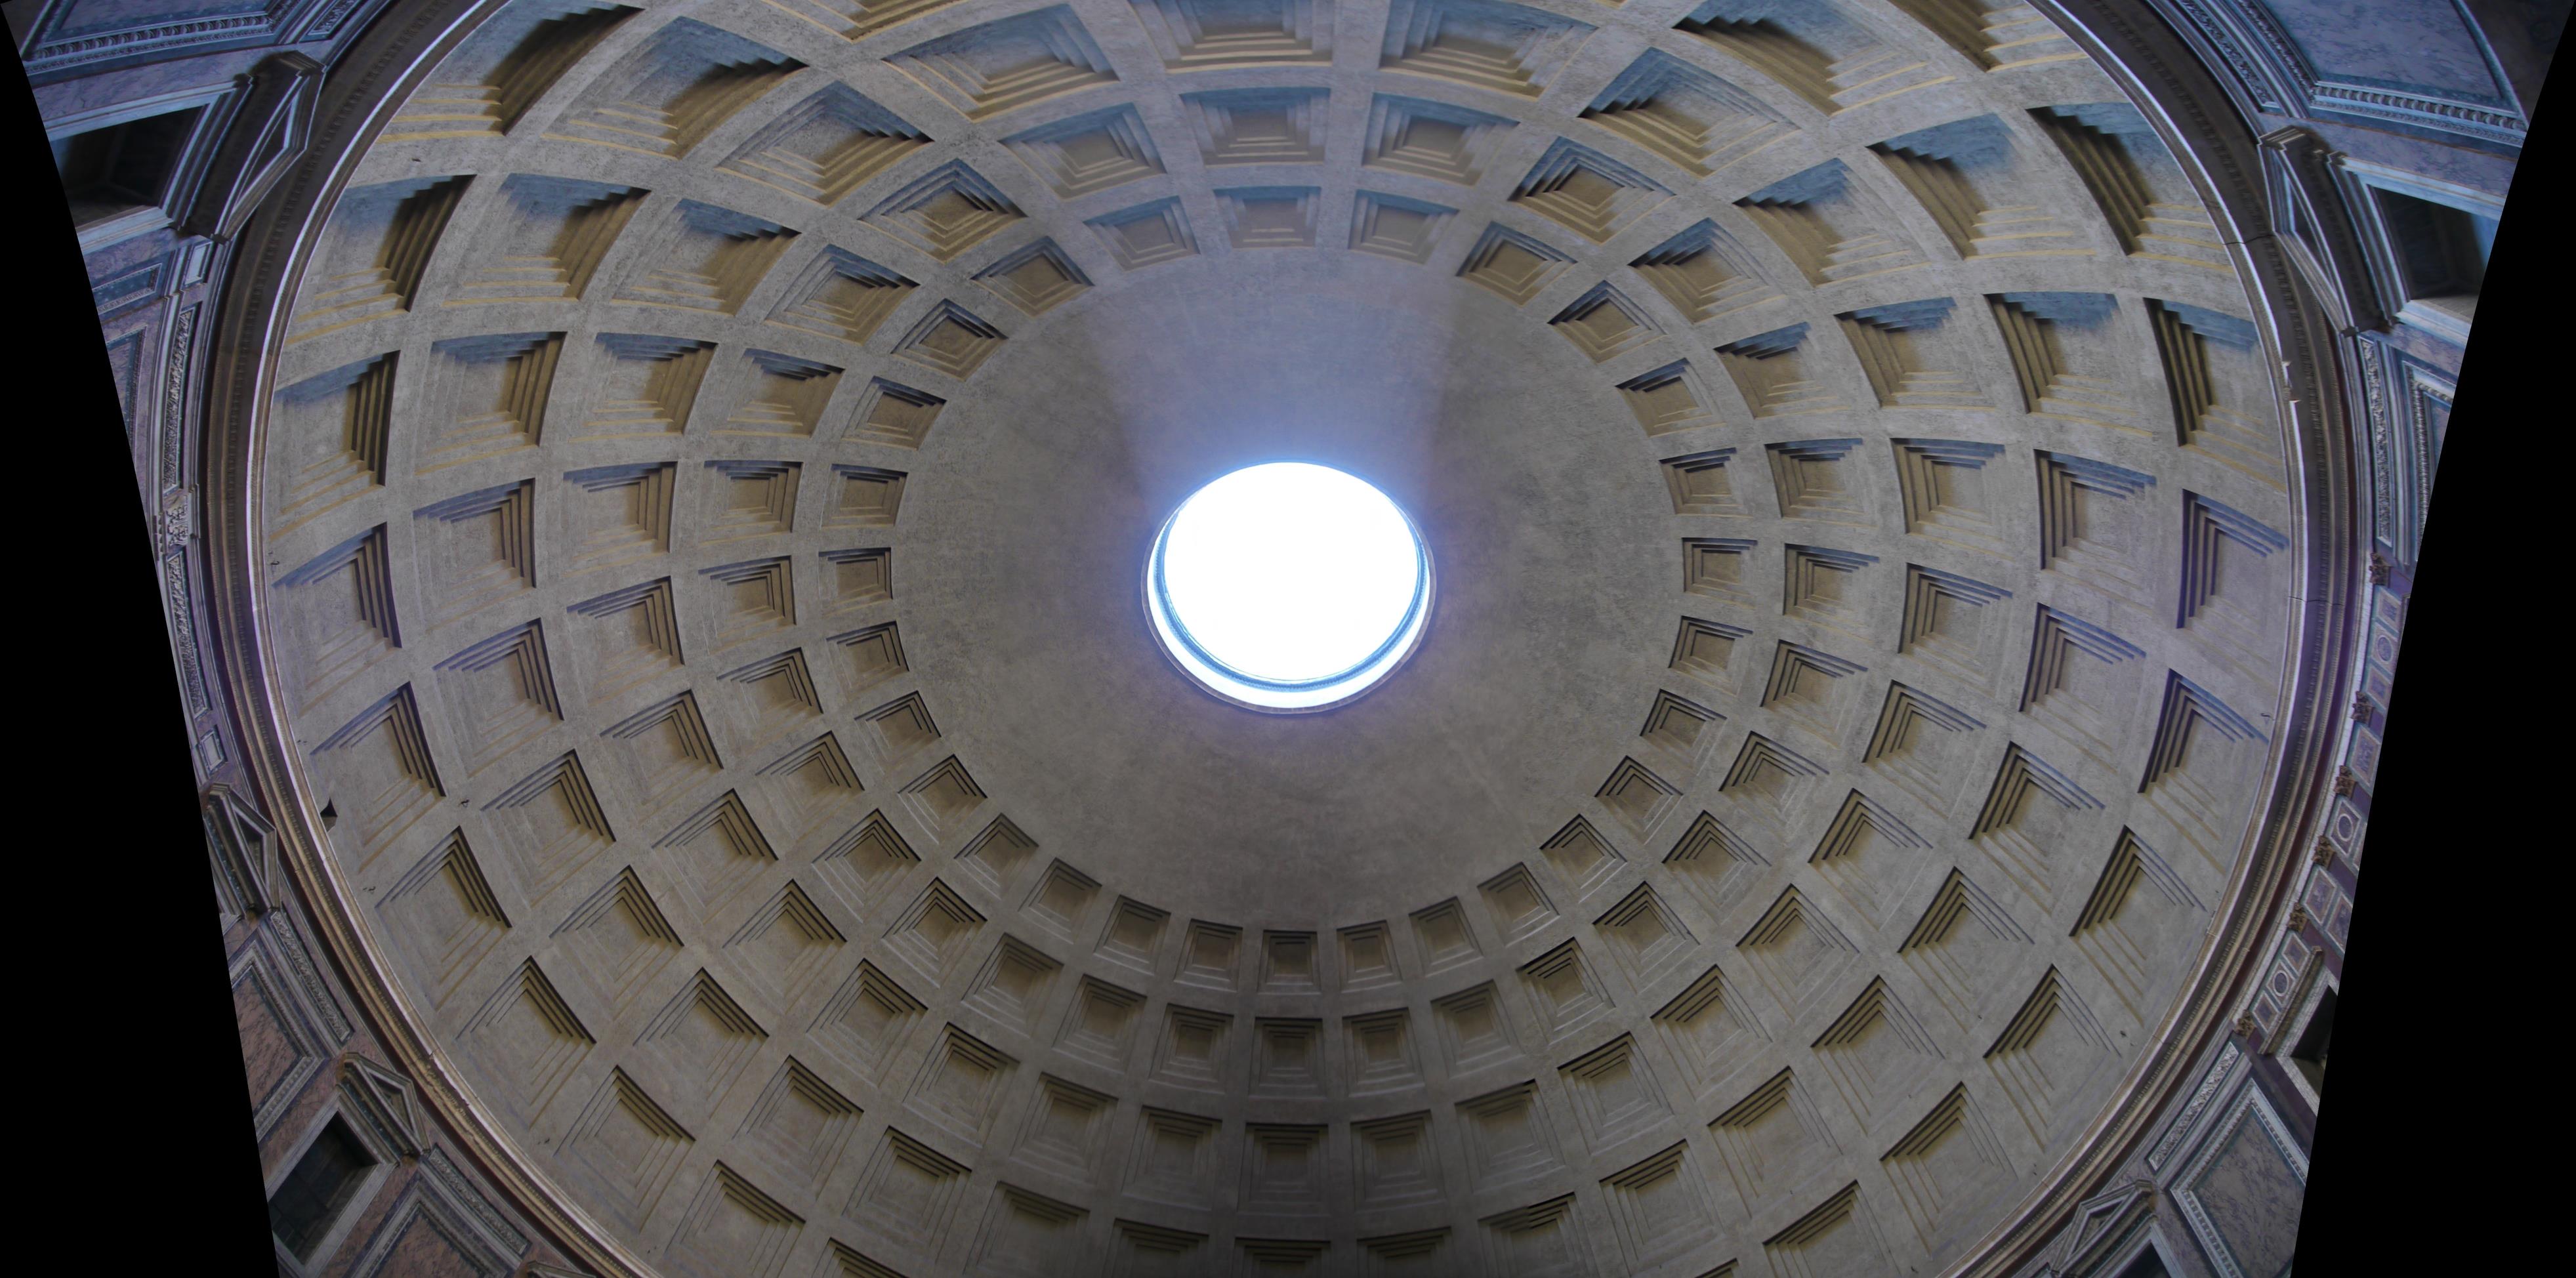 The Pantheon's amazing domed ceiling and 8.2m wide oculus